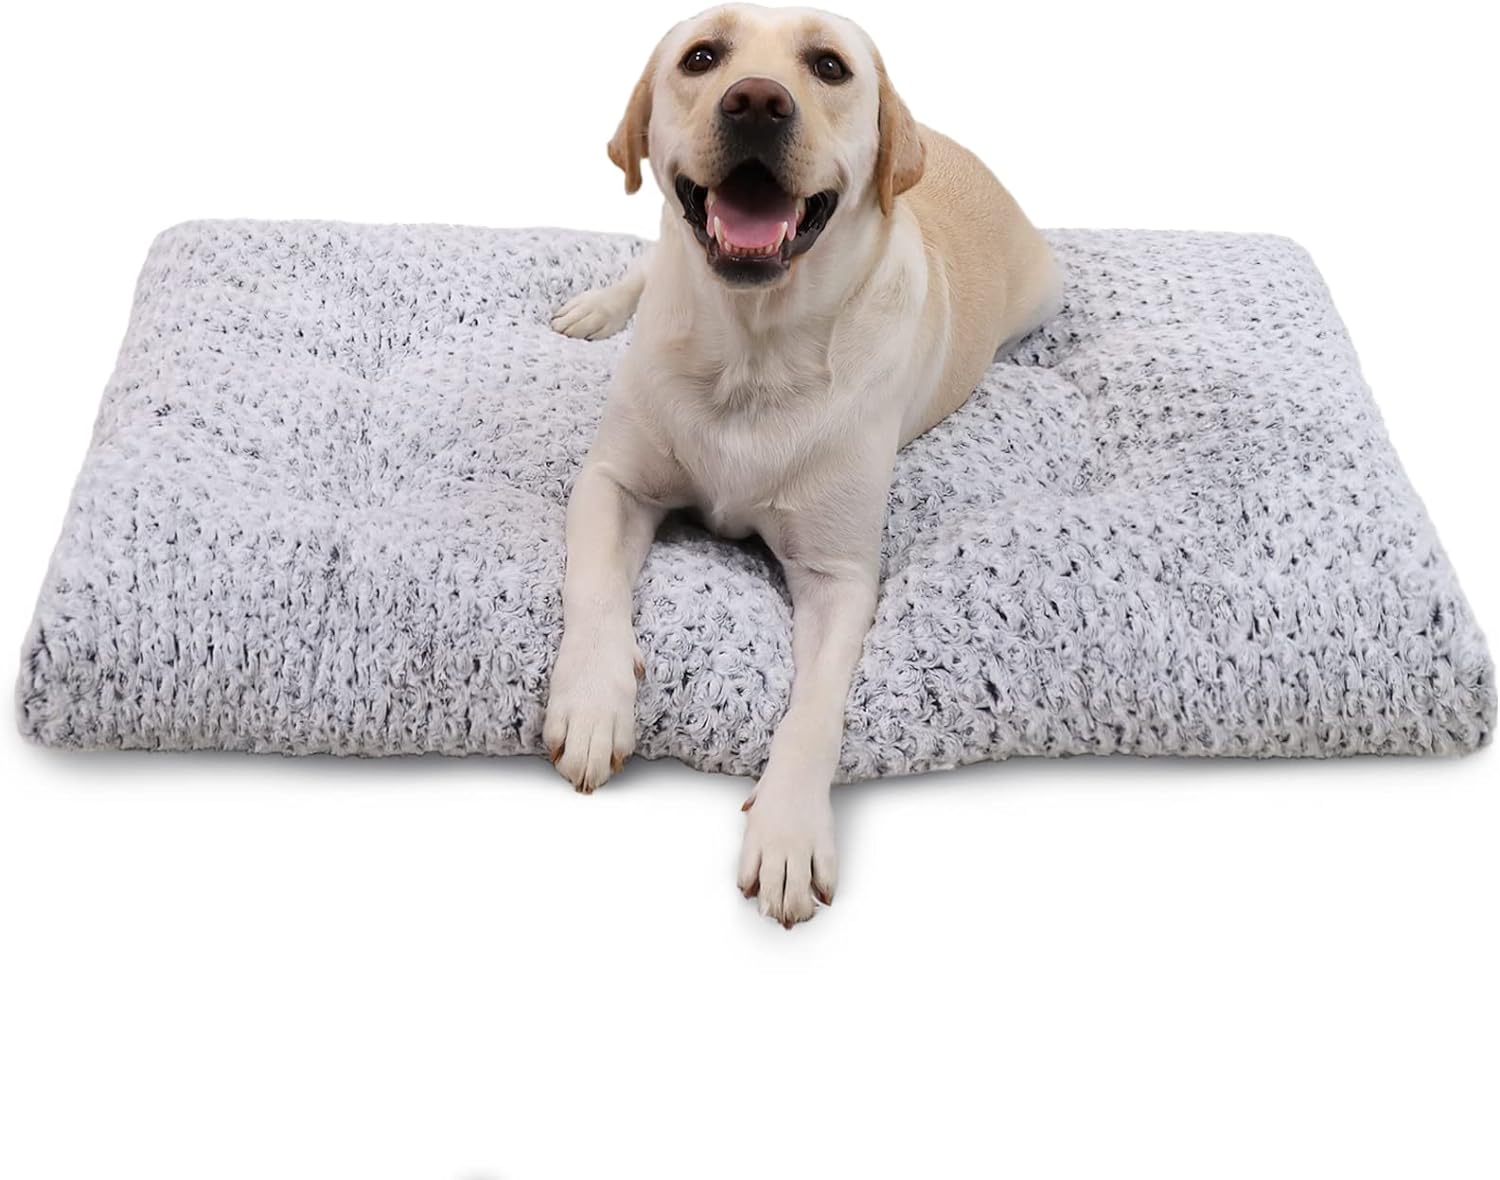 Comfy Canine Hangout: This Dog Bed Bench Lets Your Pup Relax in Style